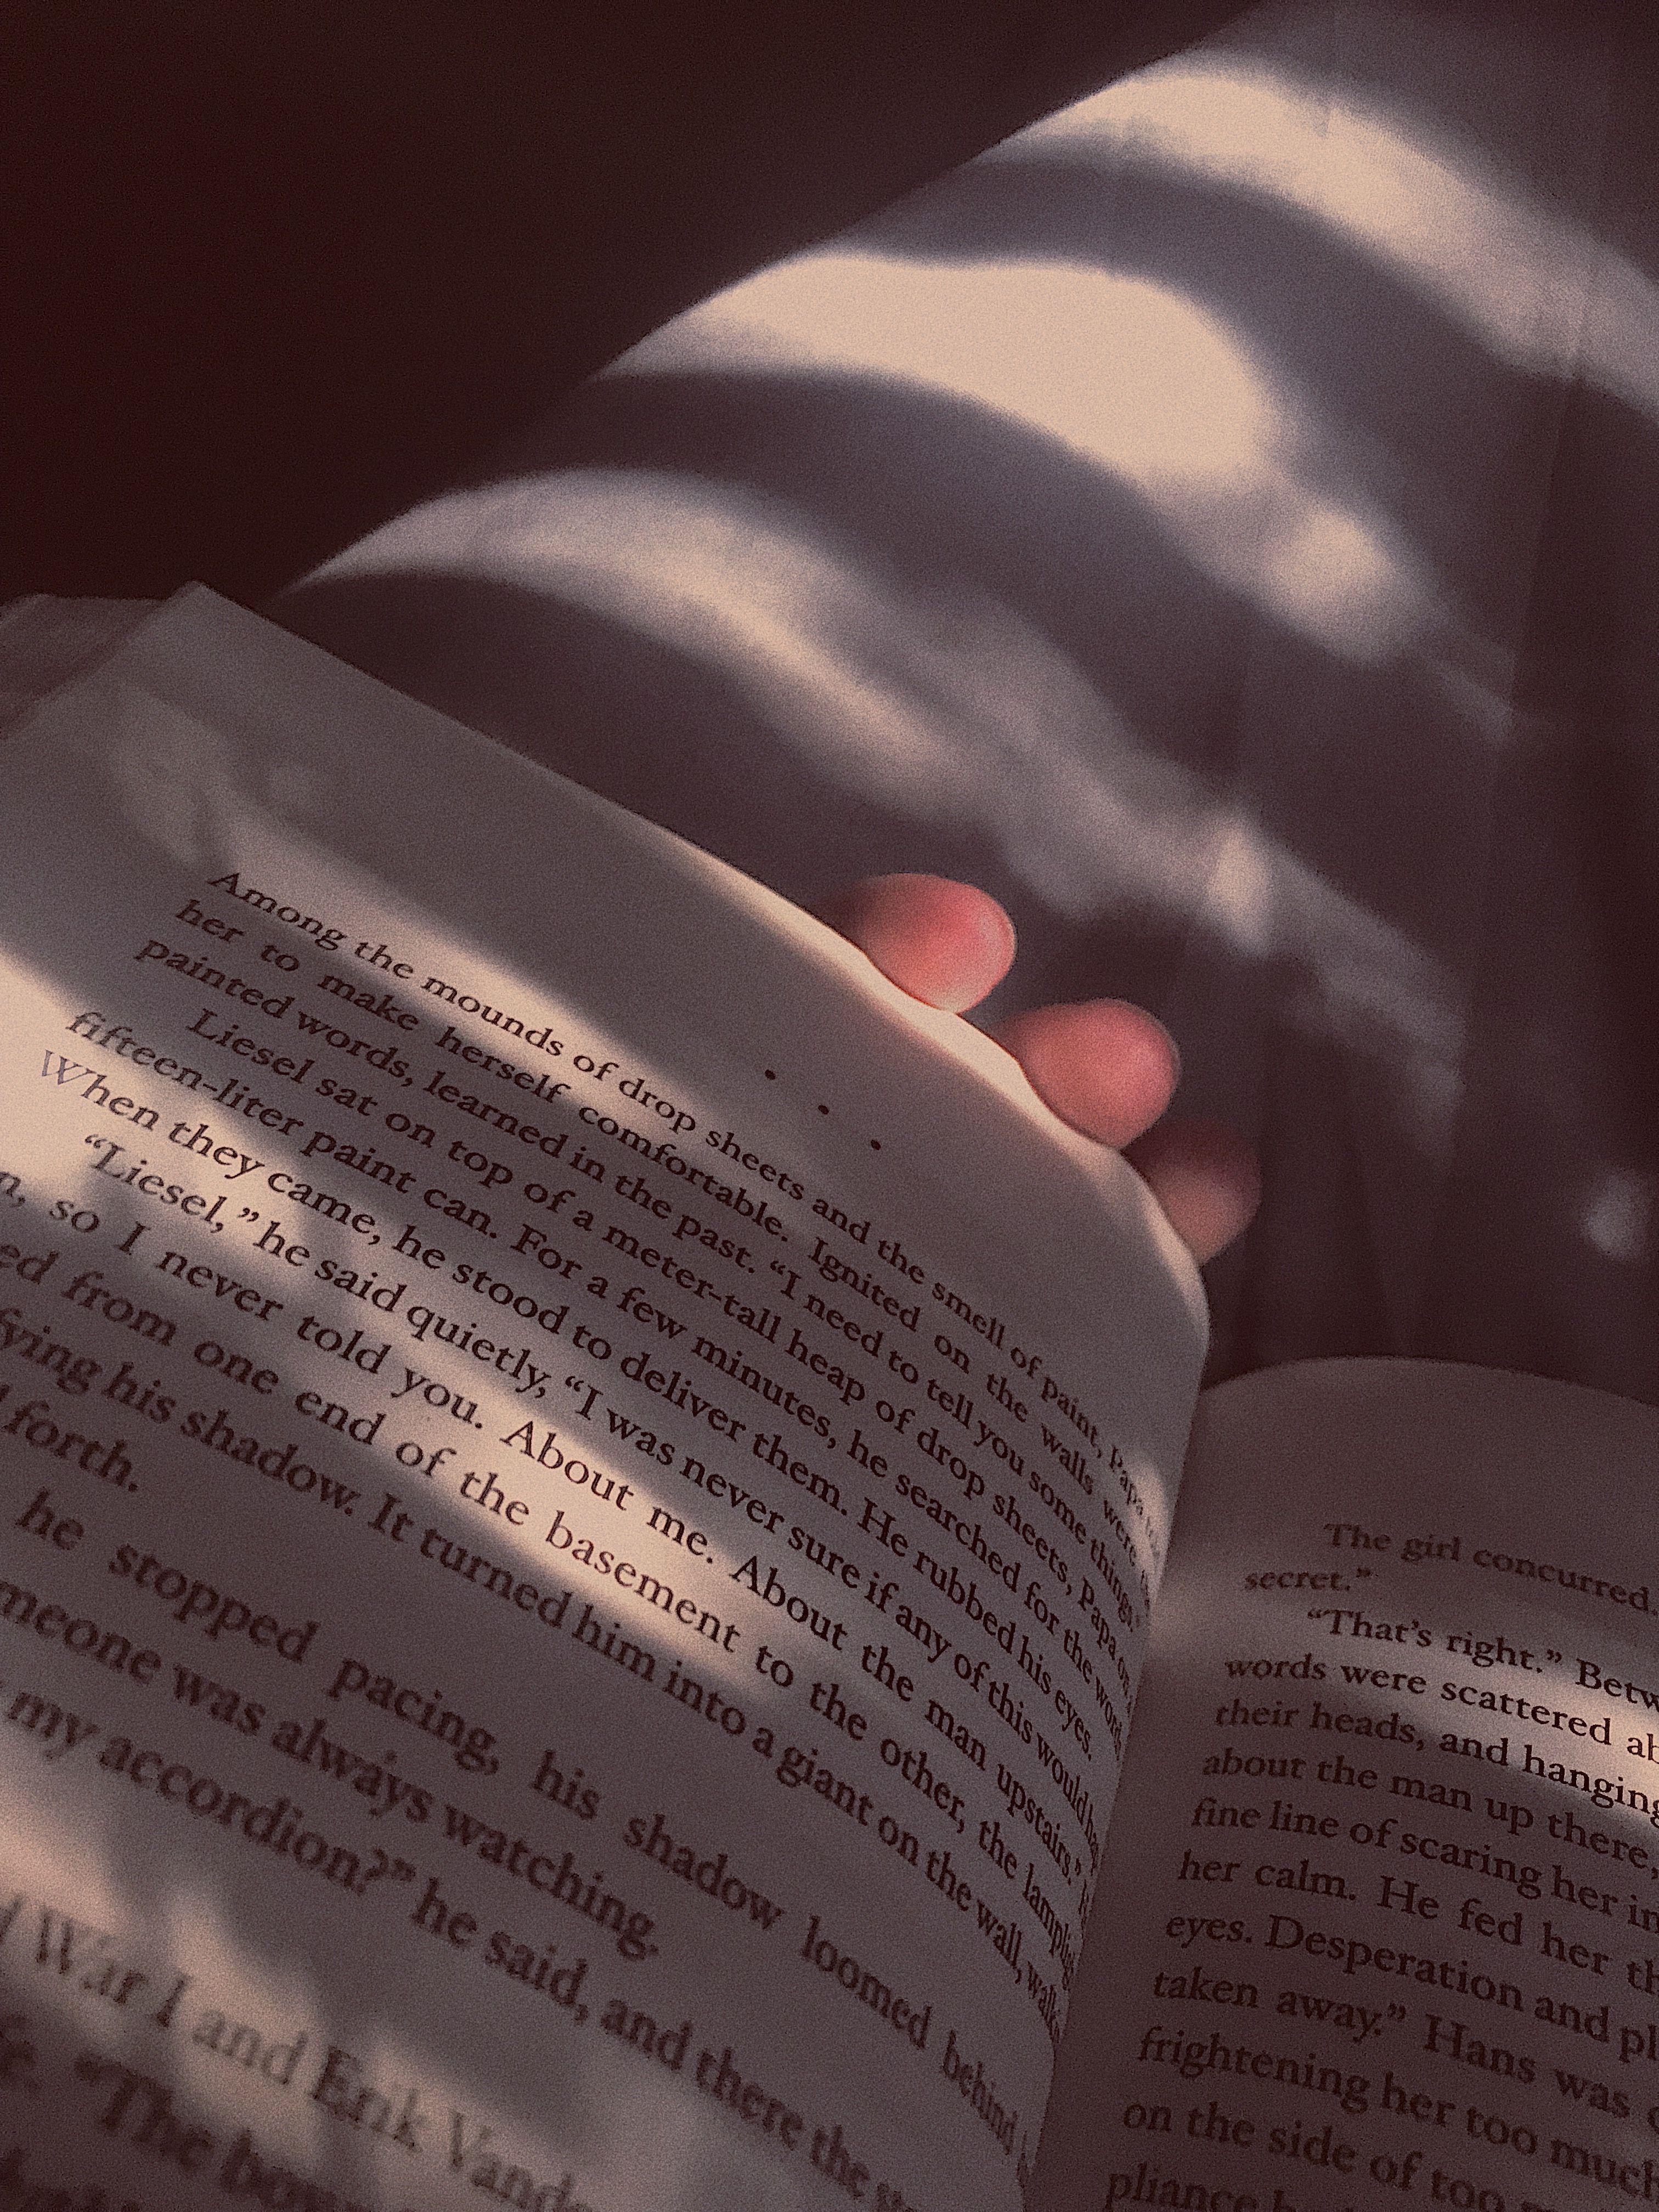 A person's hand holding an open book with the sun shining through a window. - Books, sunlight